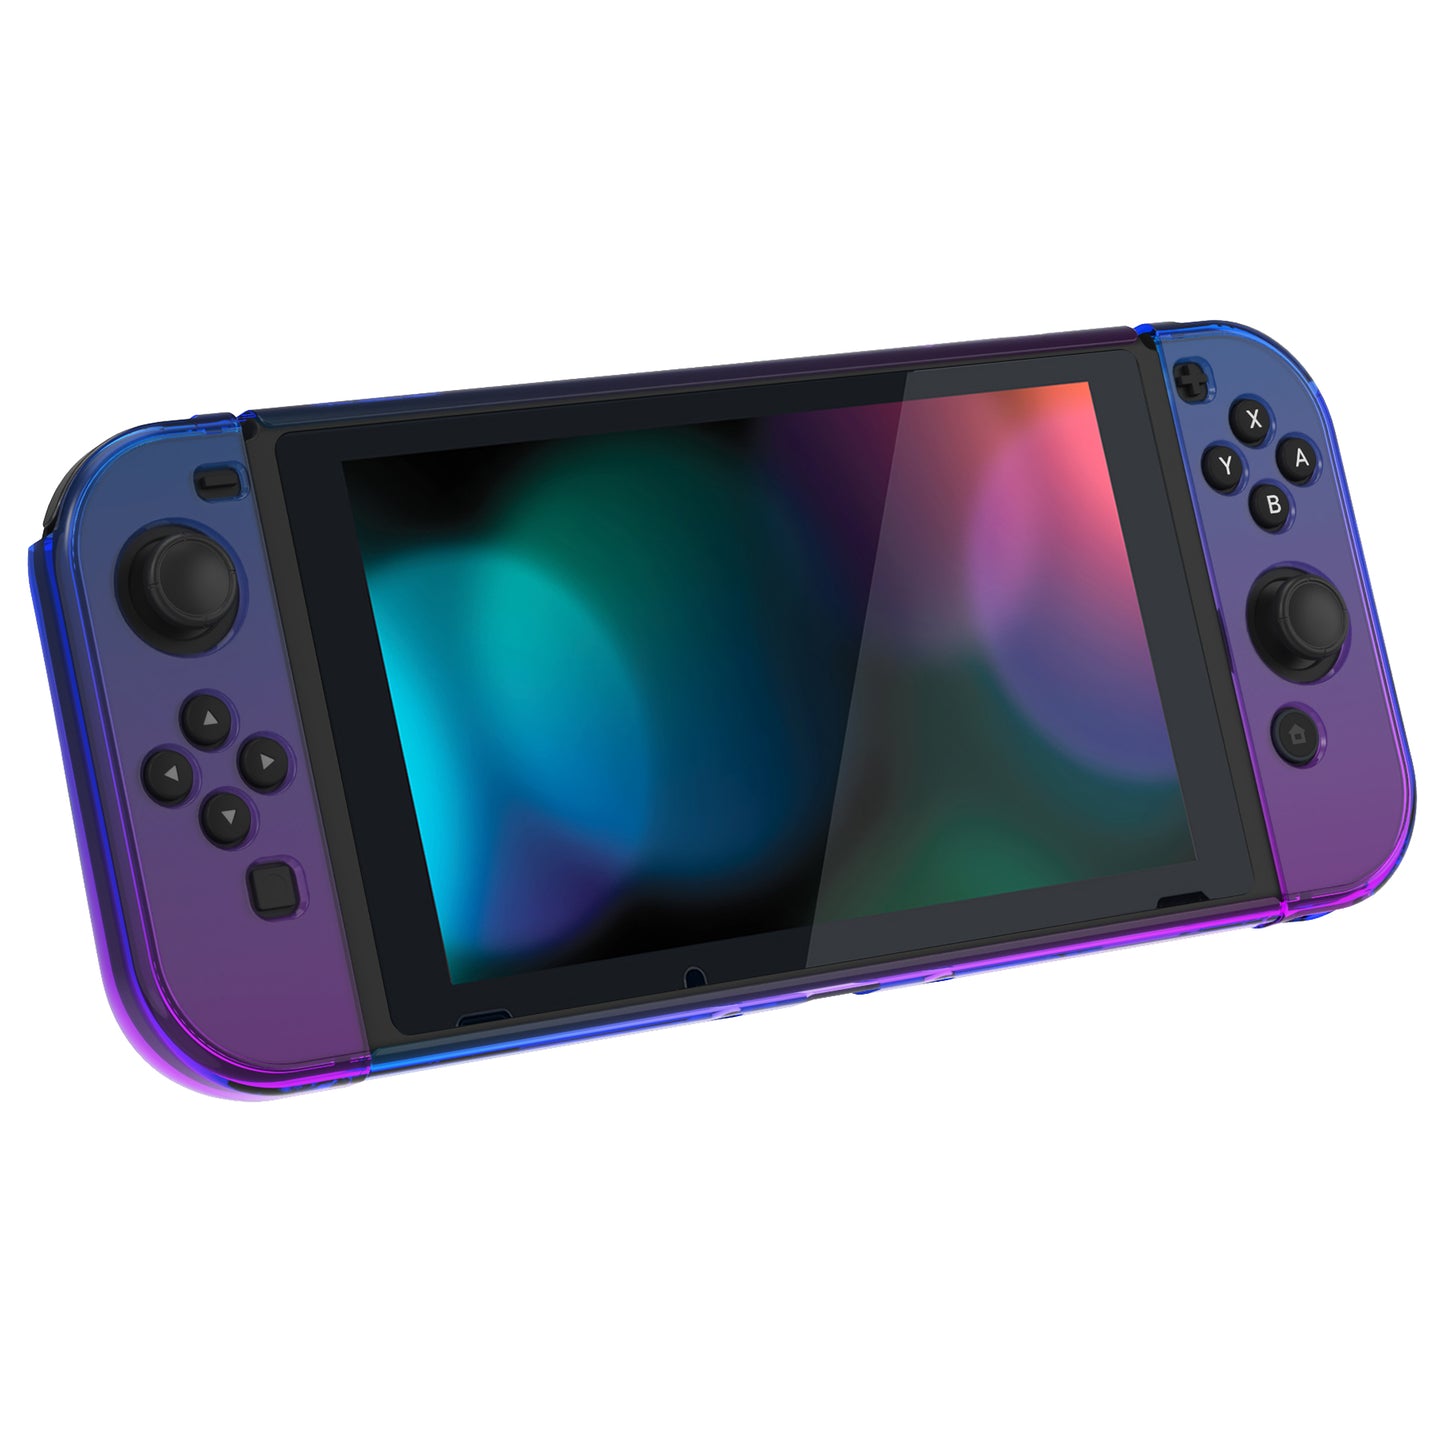 PlayVital UPGRADED Glossy Dockable Case Grip Cover for NS Switch, Ergonomic Protective Case for NS Switch, Separable Protector Hard Shell for Switch - Gradient Translucent Bluebell - ANSP3007 PlayVital